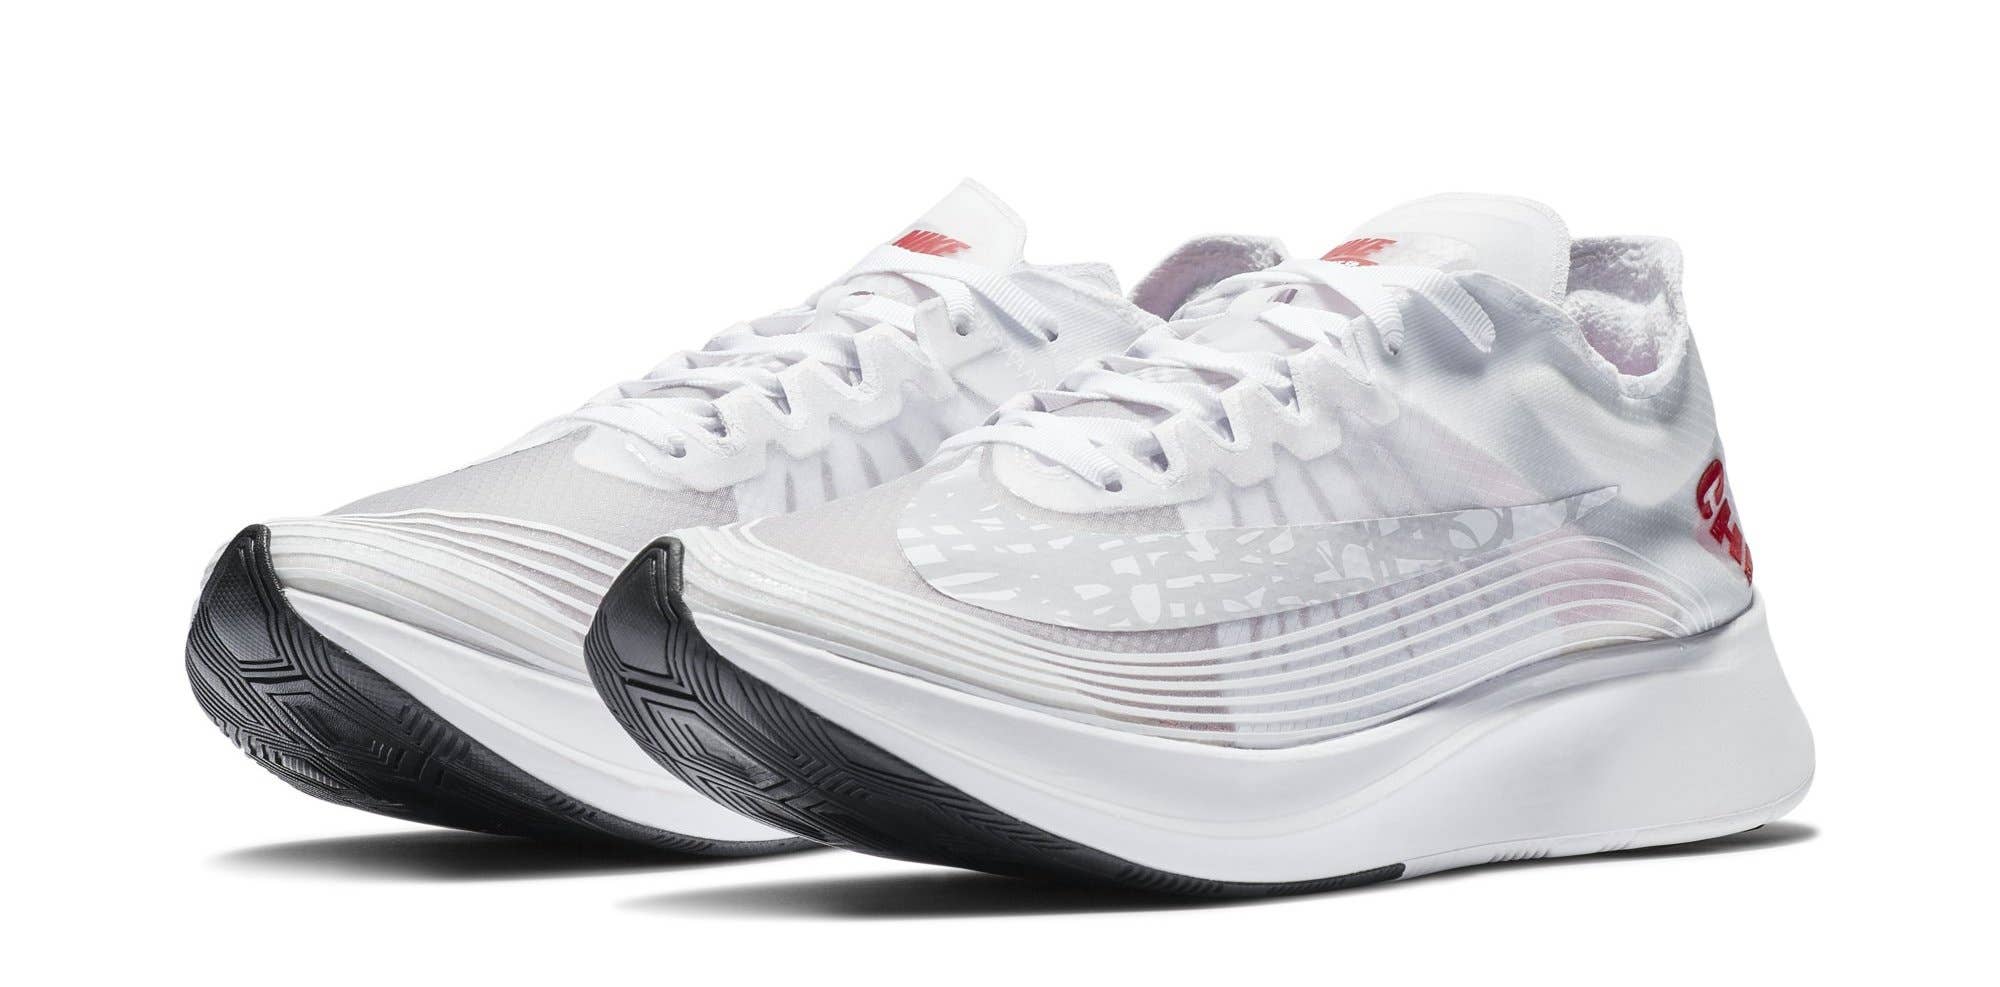 Nike Zoom Fly SP 'Chicago' BV1183 100 (Pair)